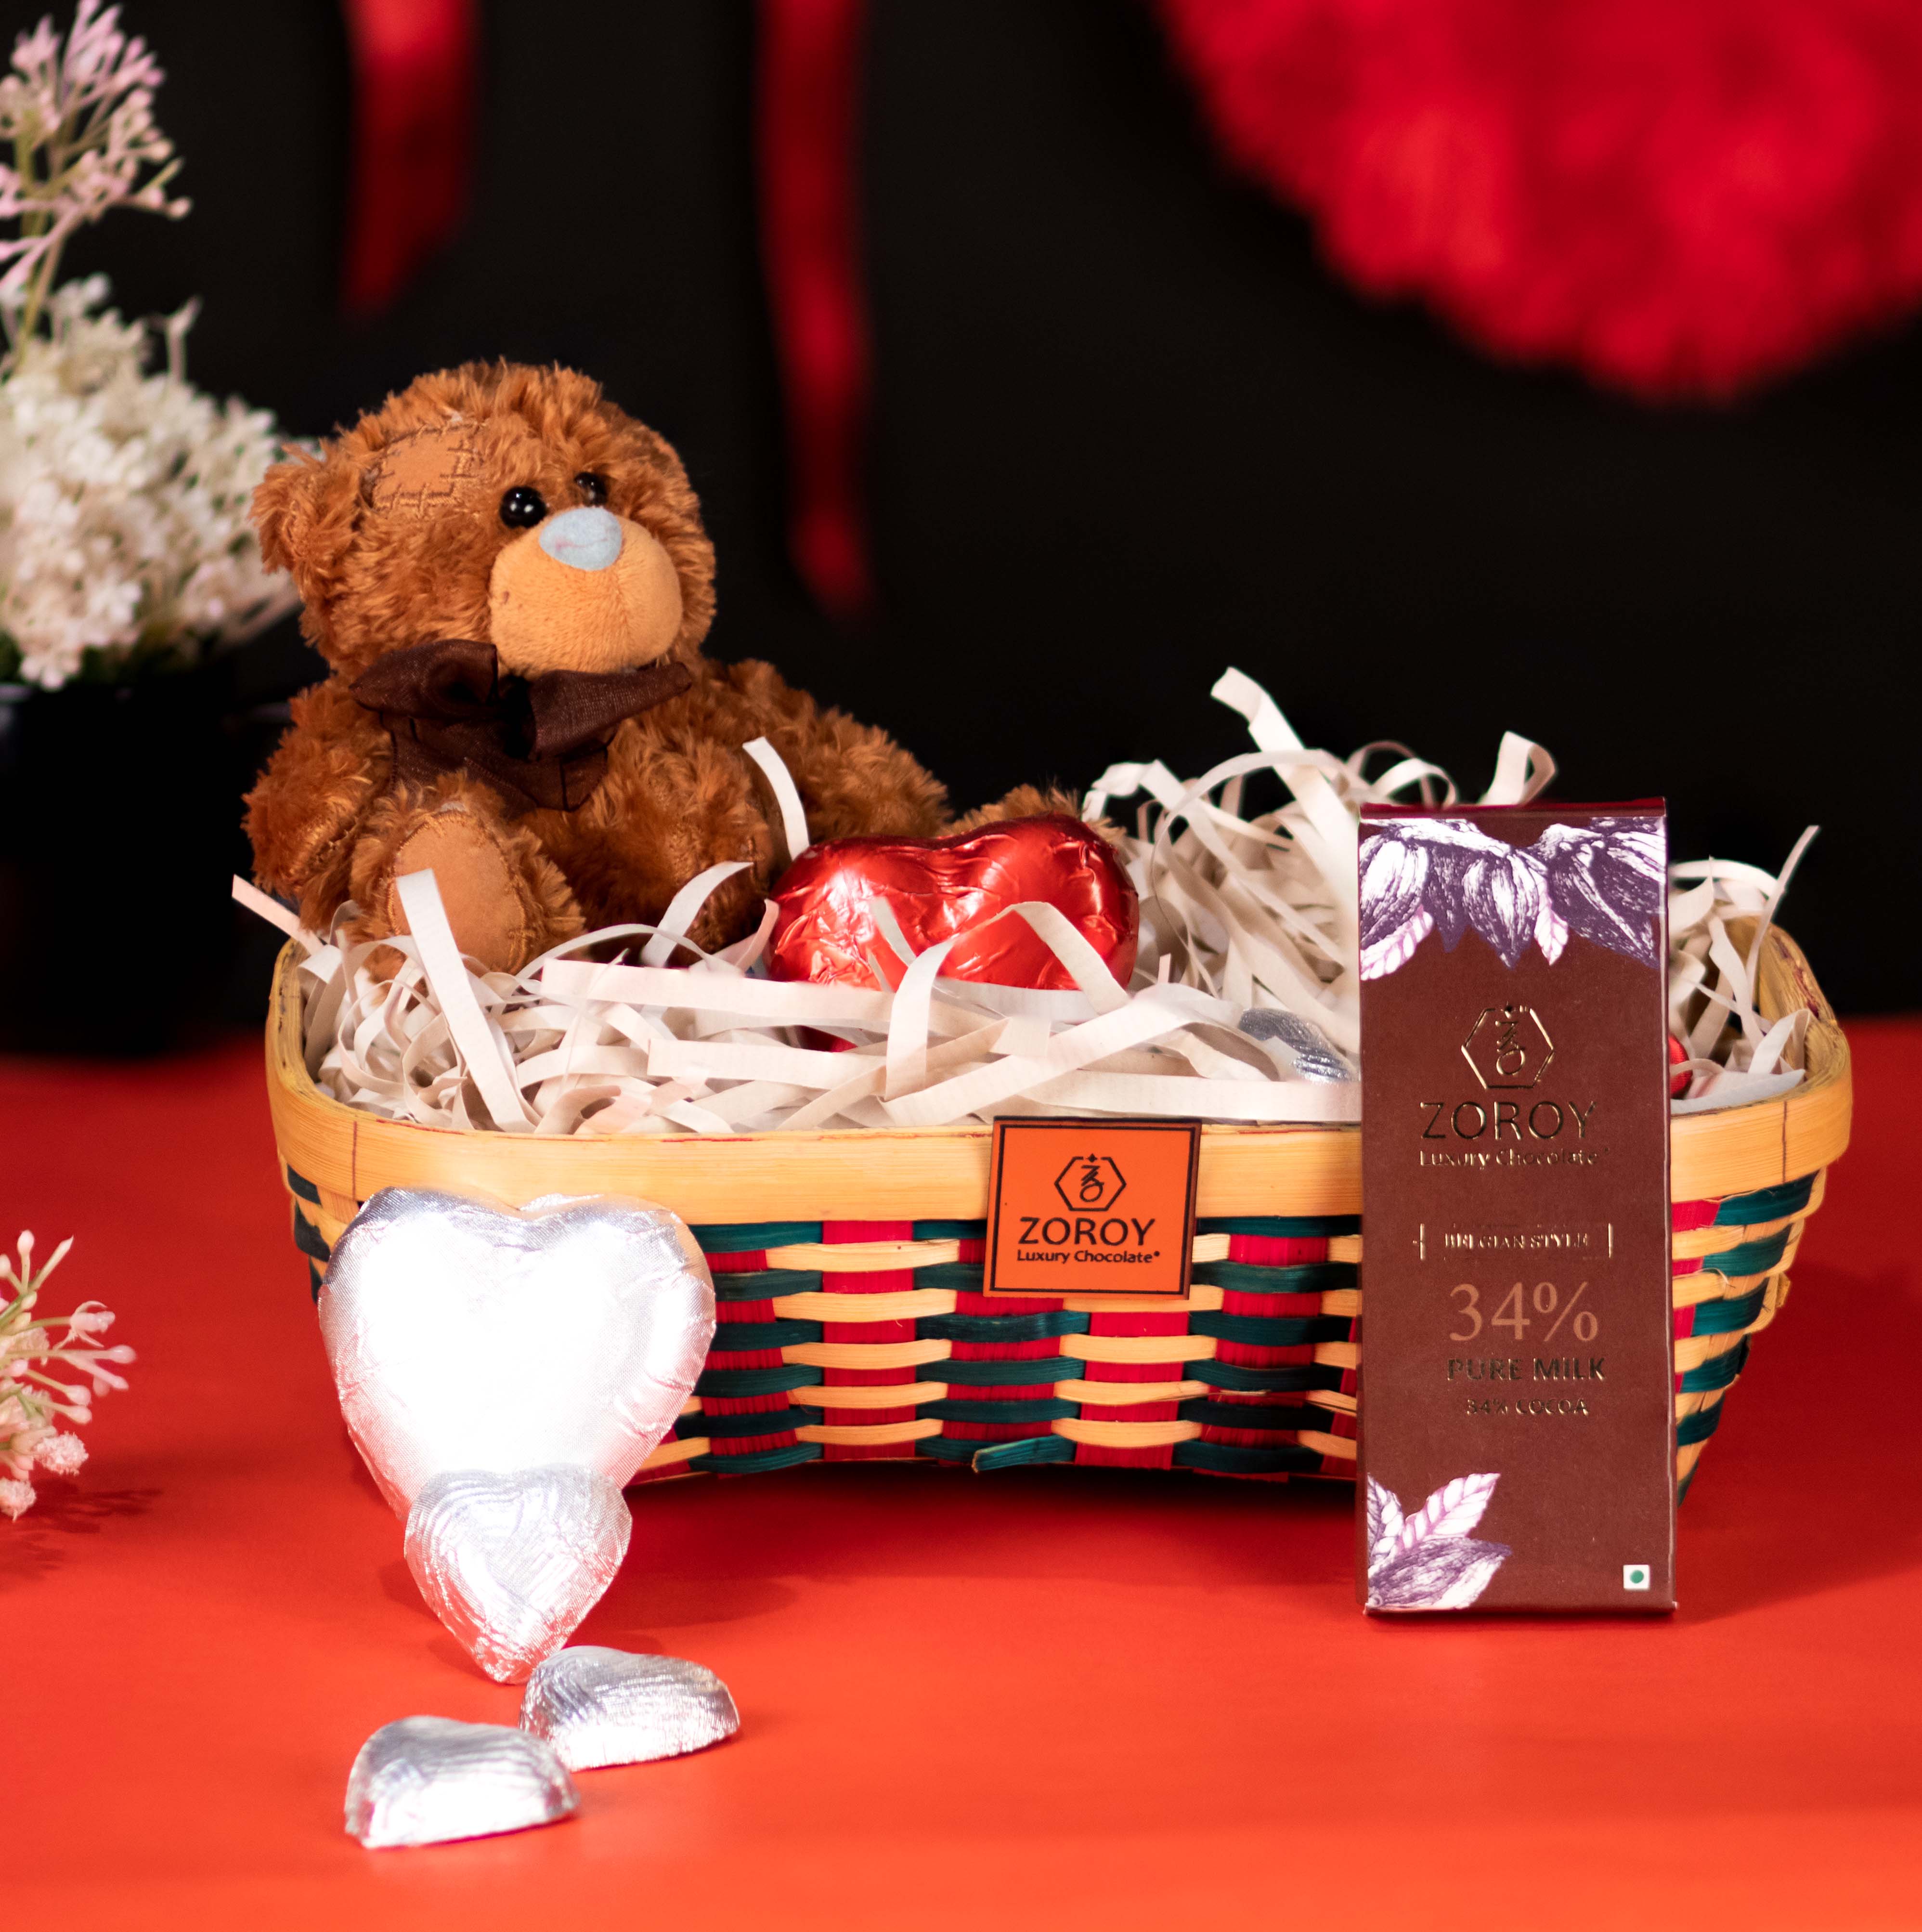 Midiron Valentines Gift Hamper for Girlfriend/Boyfriend|Rose Day, Chocolate  Day, Hug Day Gift|Romantic Gift-Chocolate Red Basket Dairy Milk & Kitkat,  Red Teddy, Artificial Red Rose & Love Card : Amazon.in: Grocery & Gourmet